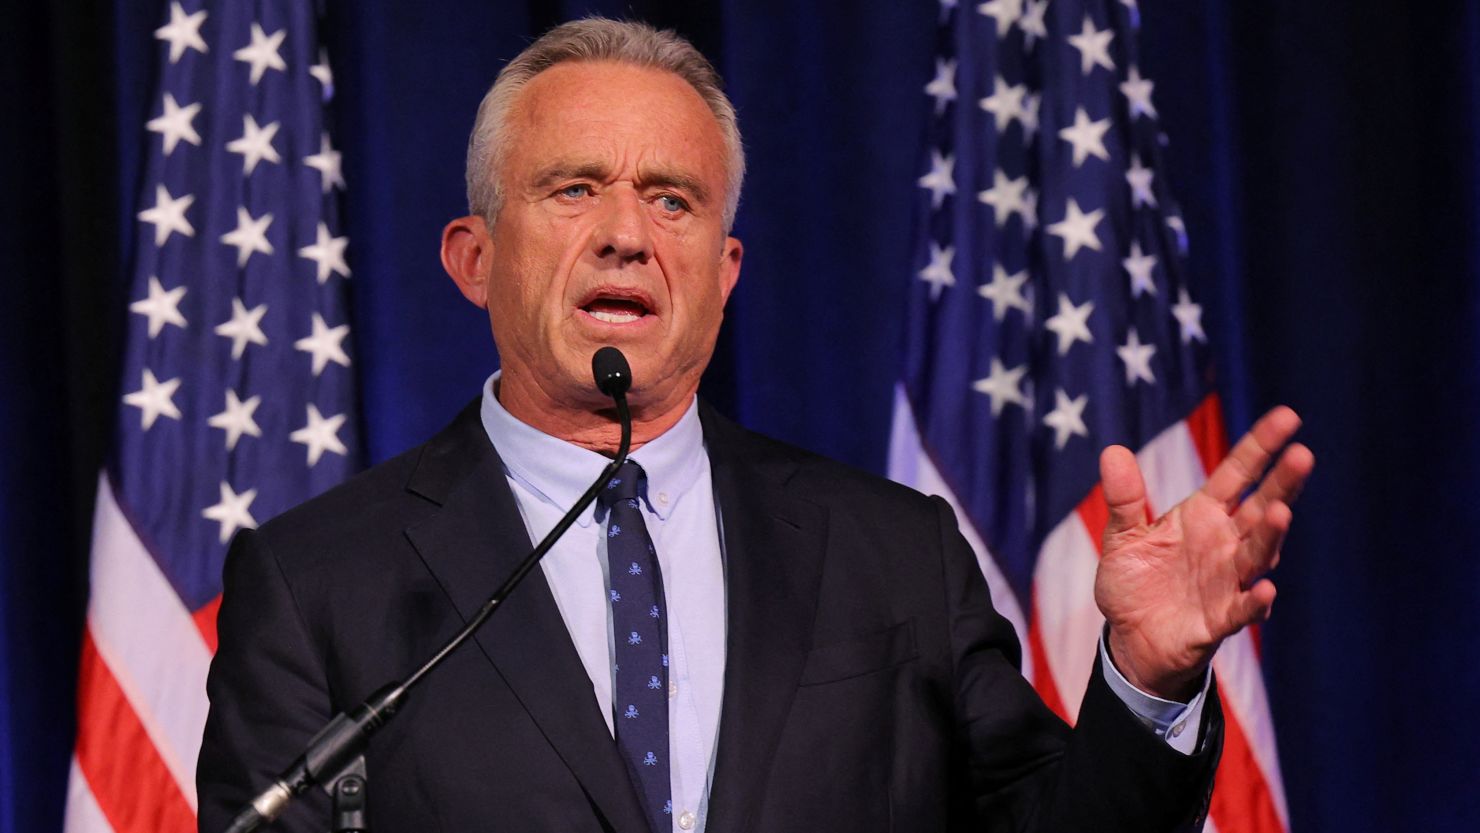 Democratic presidential candidate Robert F. Kennedy Jr. delivers a foreign policy speech at St. Anselm College in Manchester, New Hampshire, on June 20, 2023.